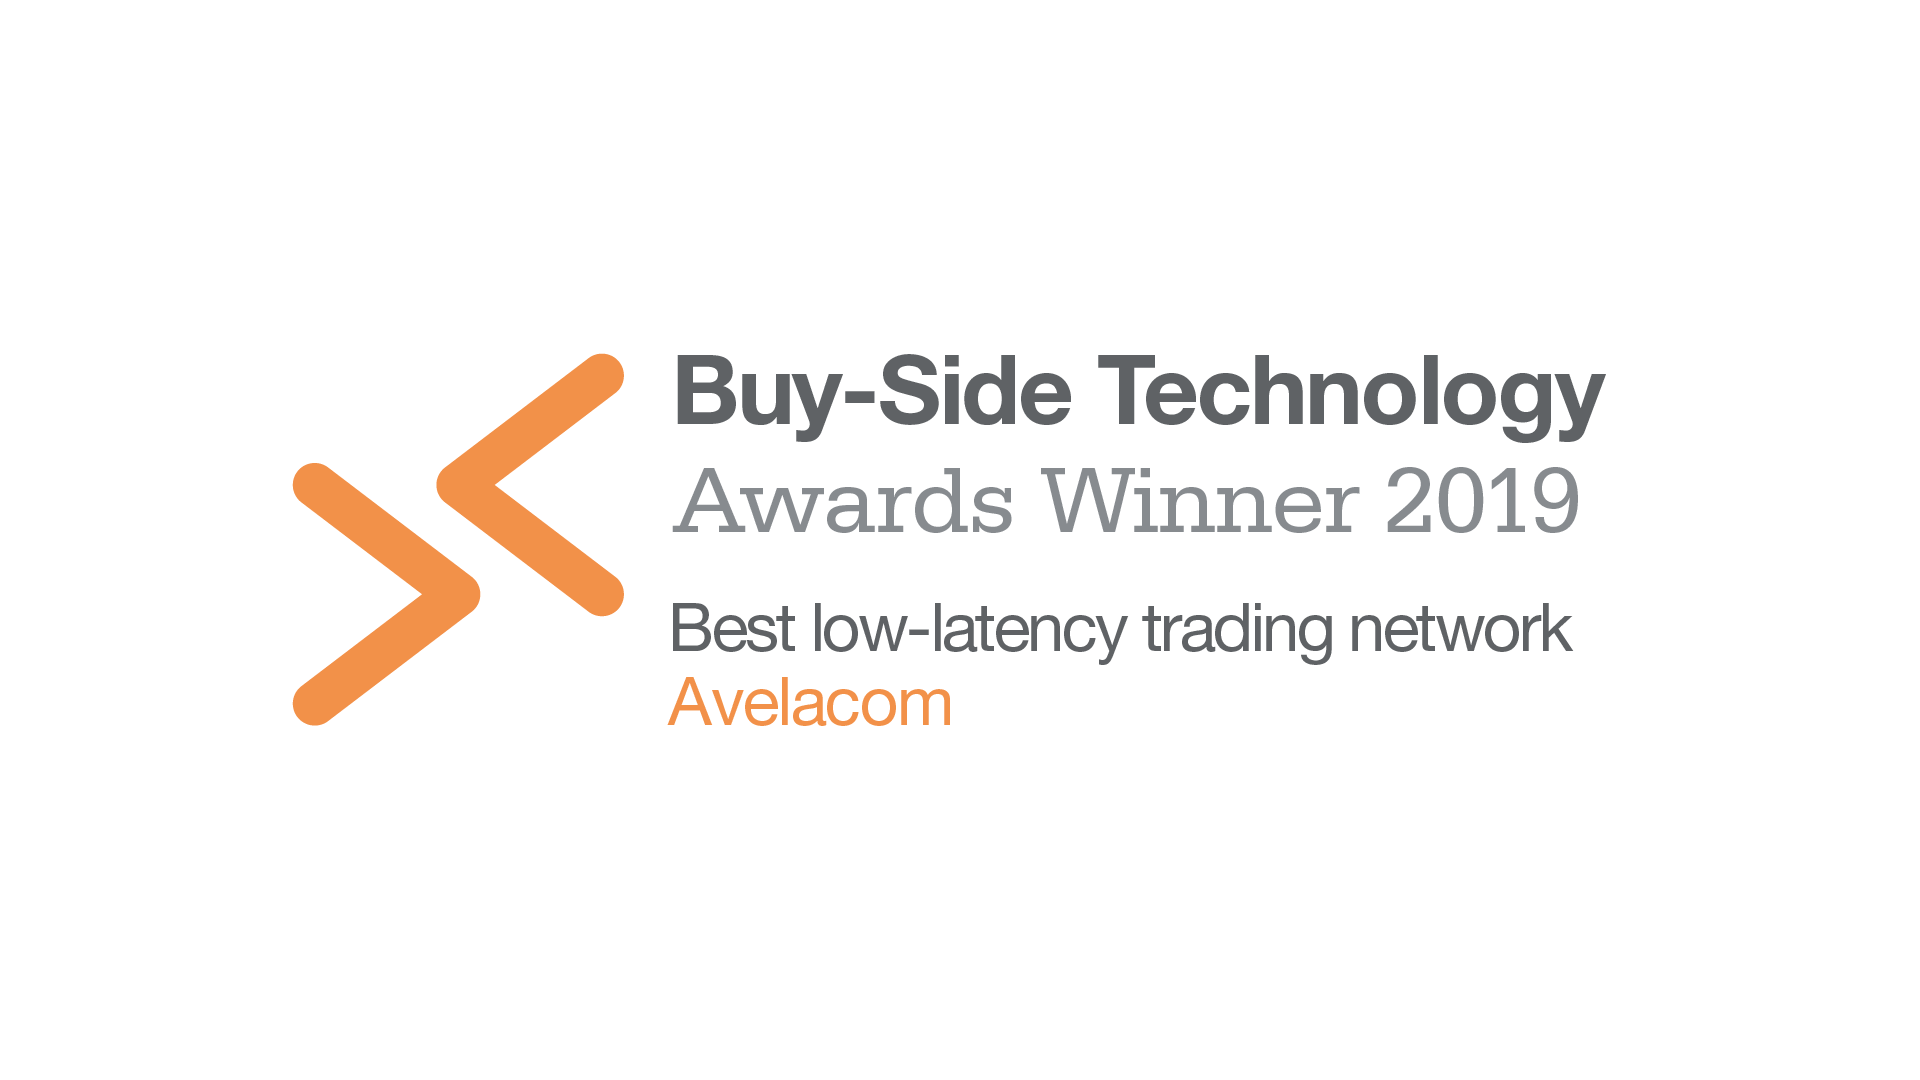 Avelacom wins best low-latency trading network at Buy-Side Technology Awards